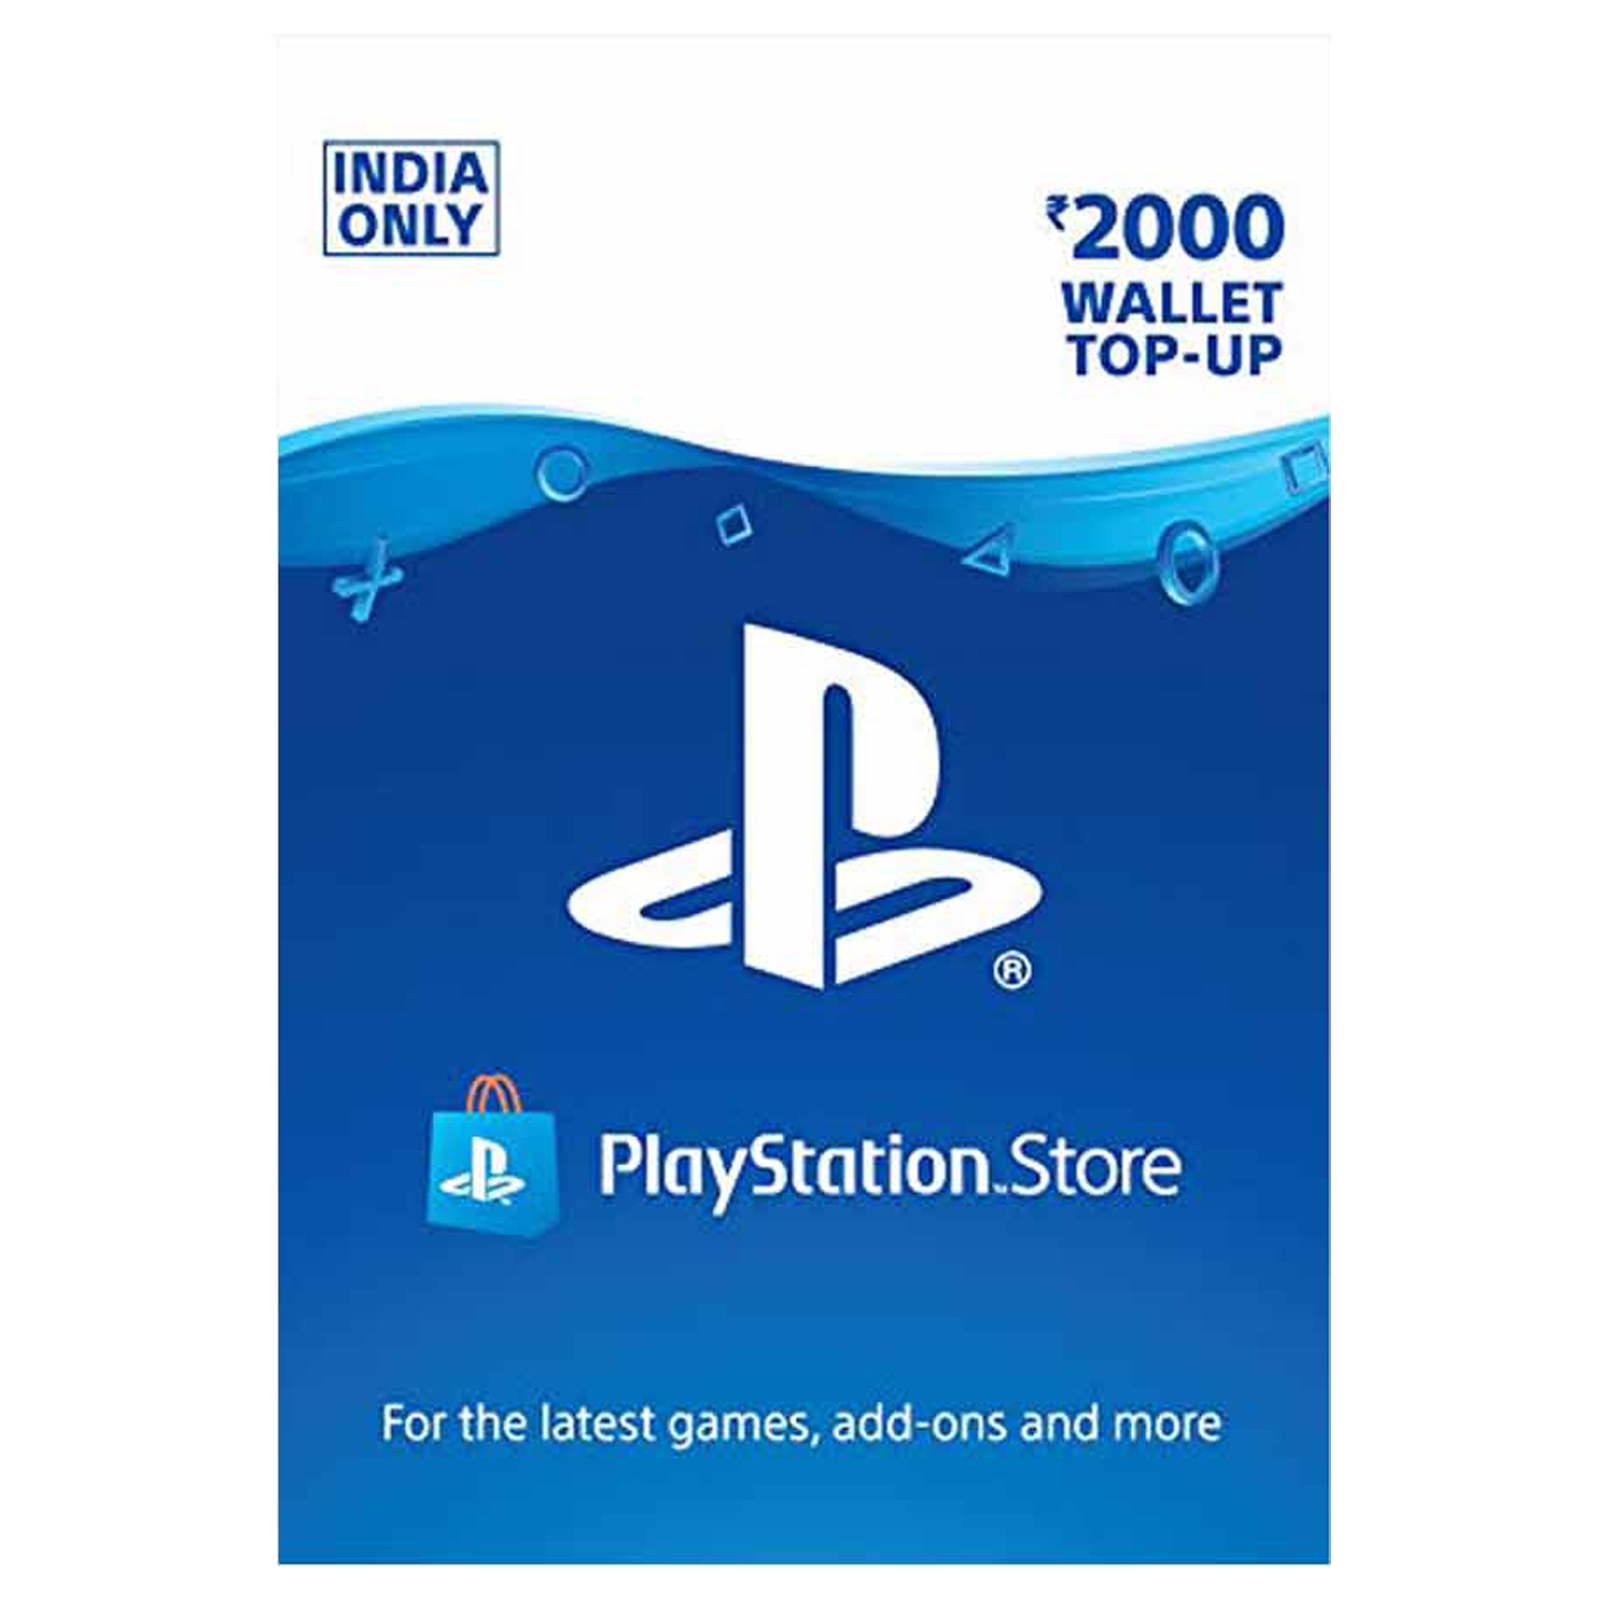 Sony PlayStation Wallet For PS5 PS4 PS3 or PS Vita (Top 2000 New, 50668384)_1